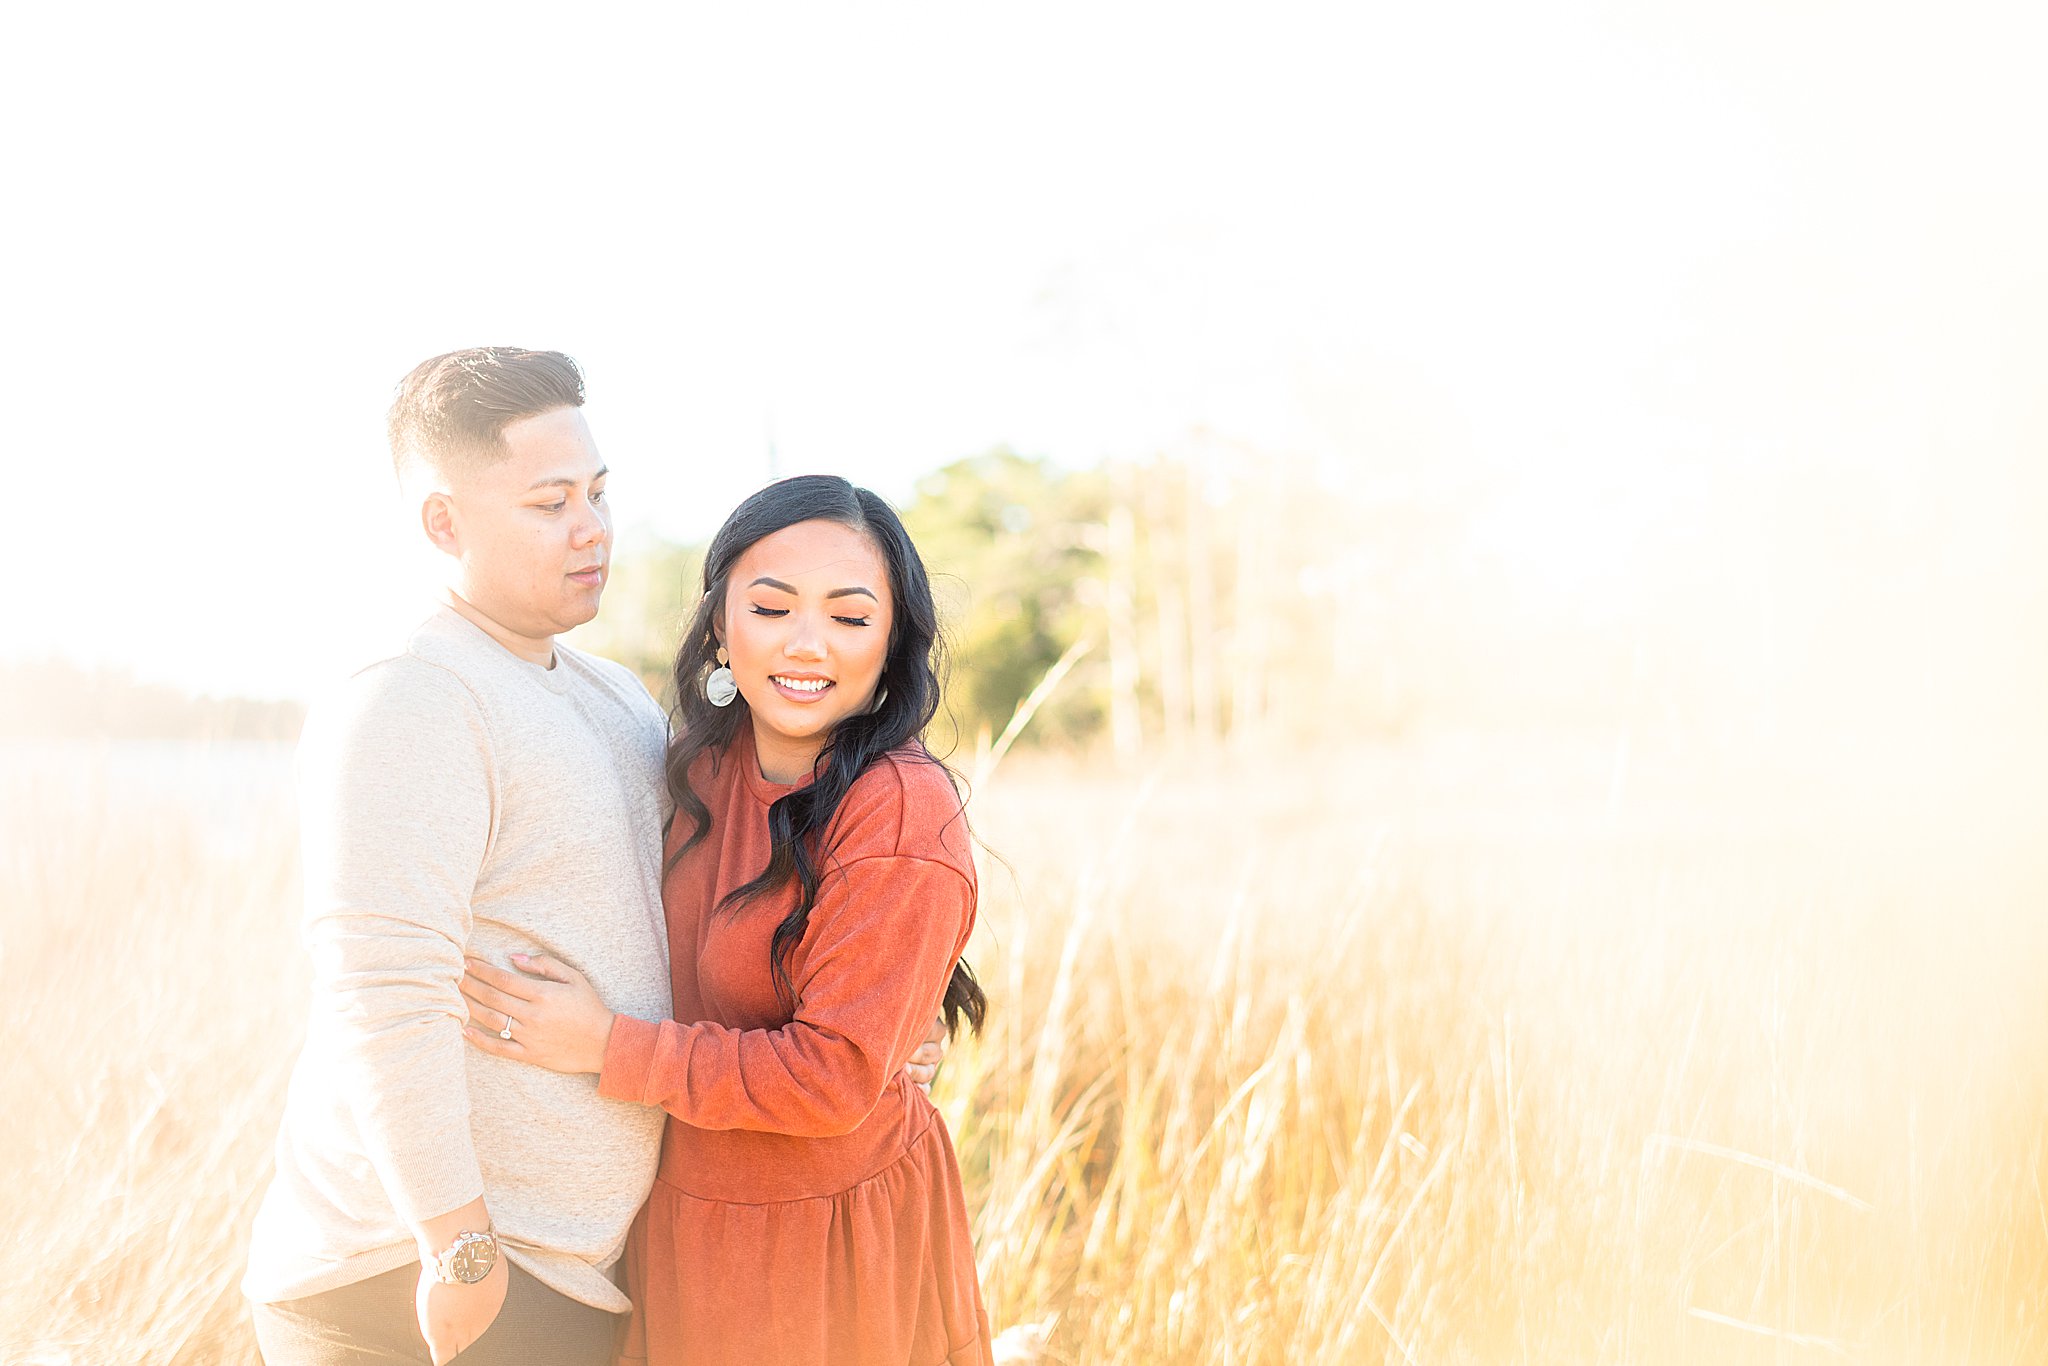 A First Landing Engagement Session